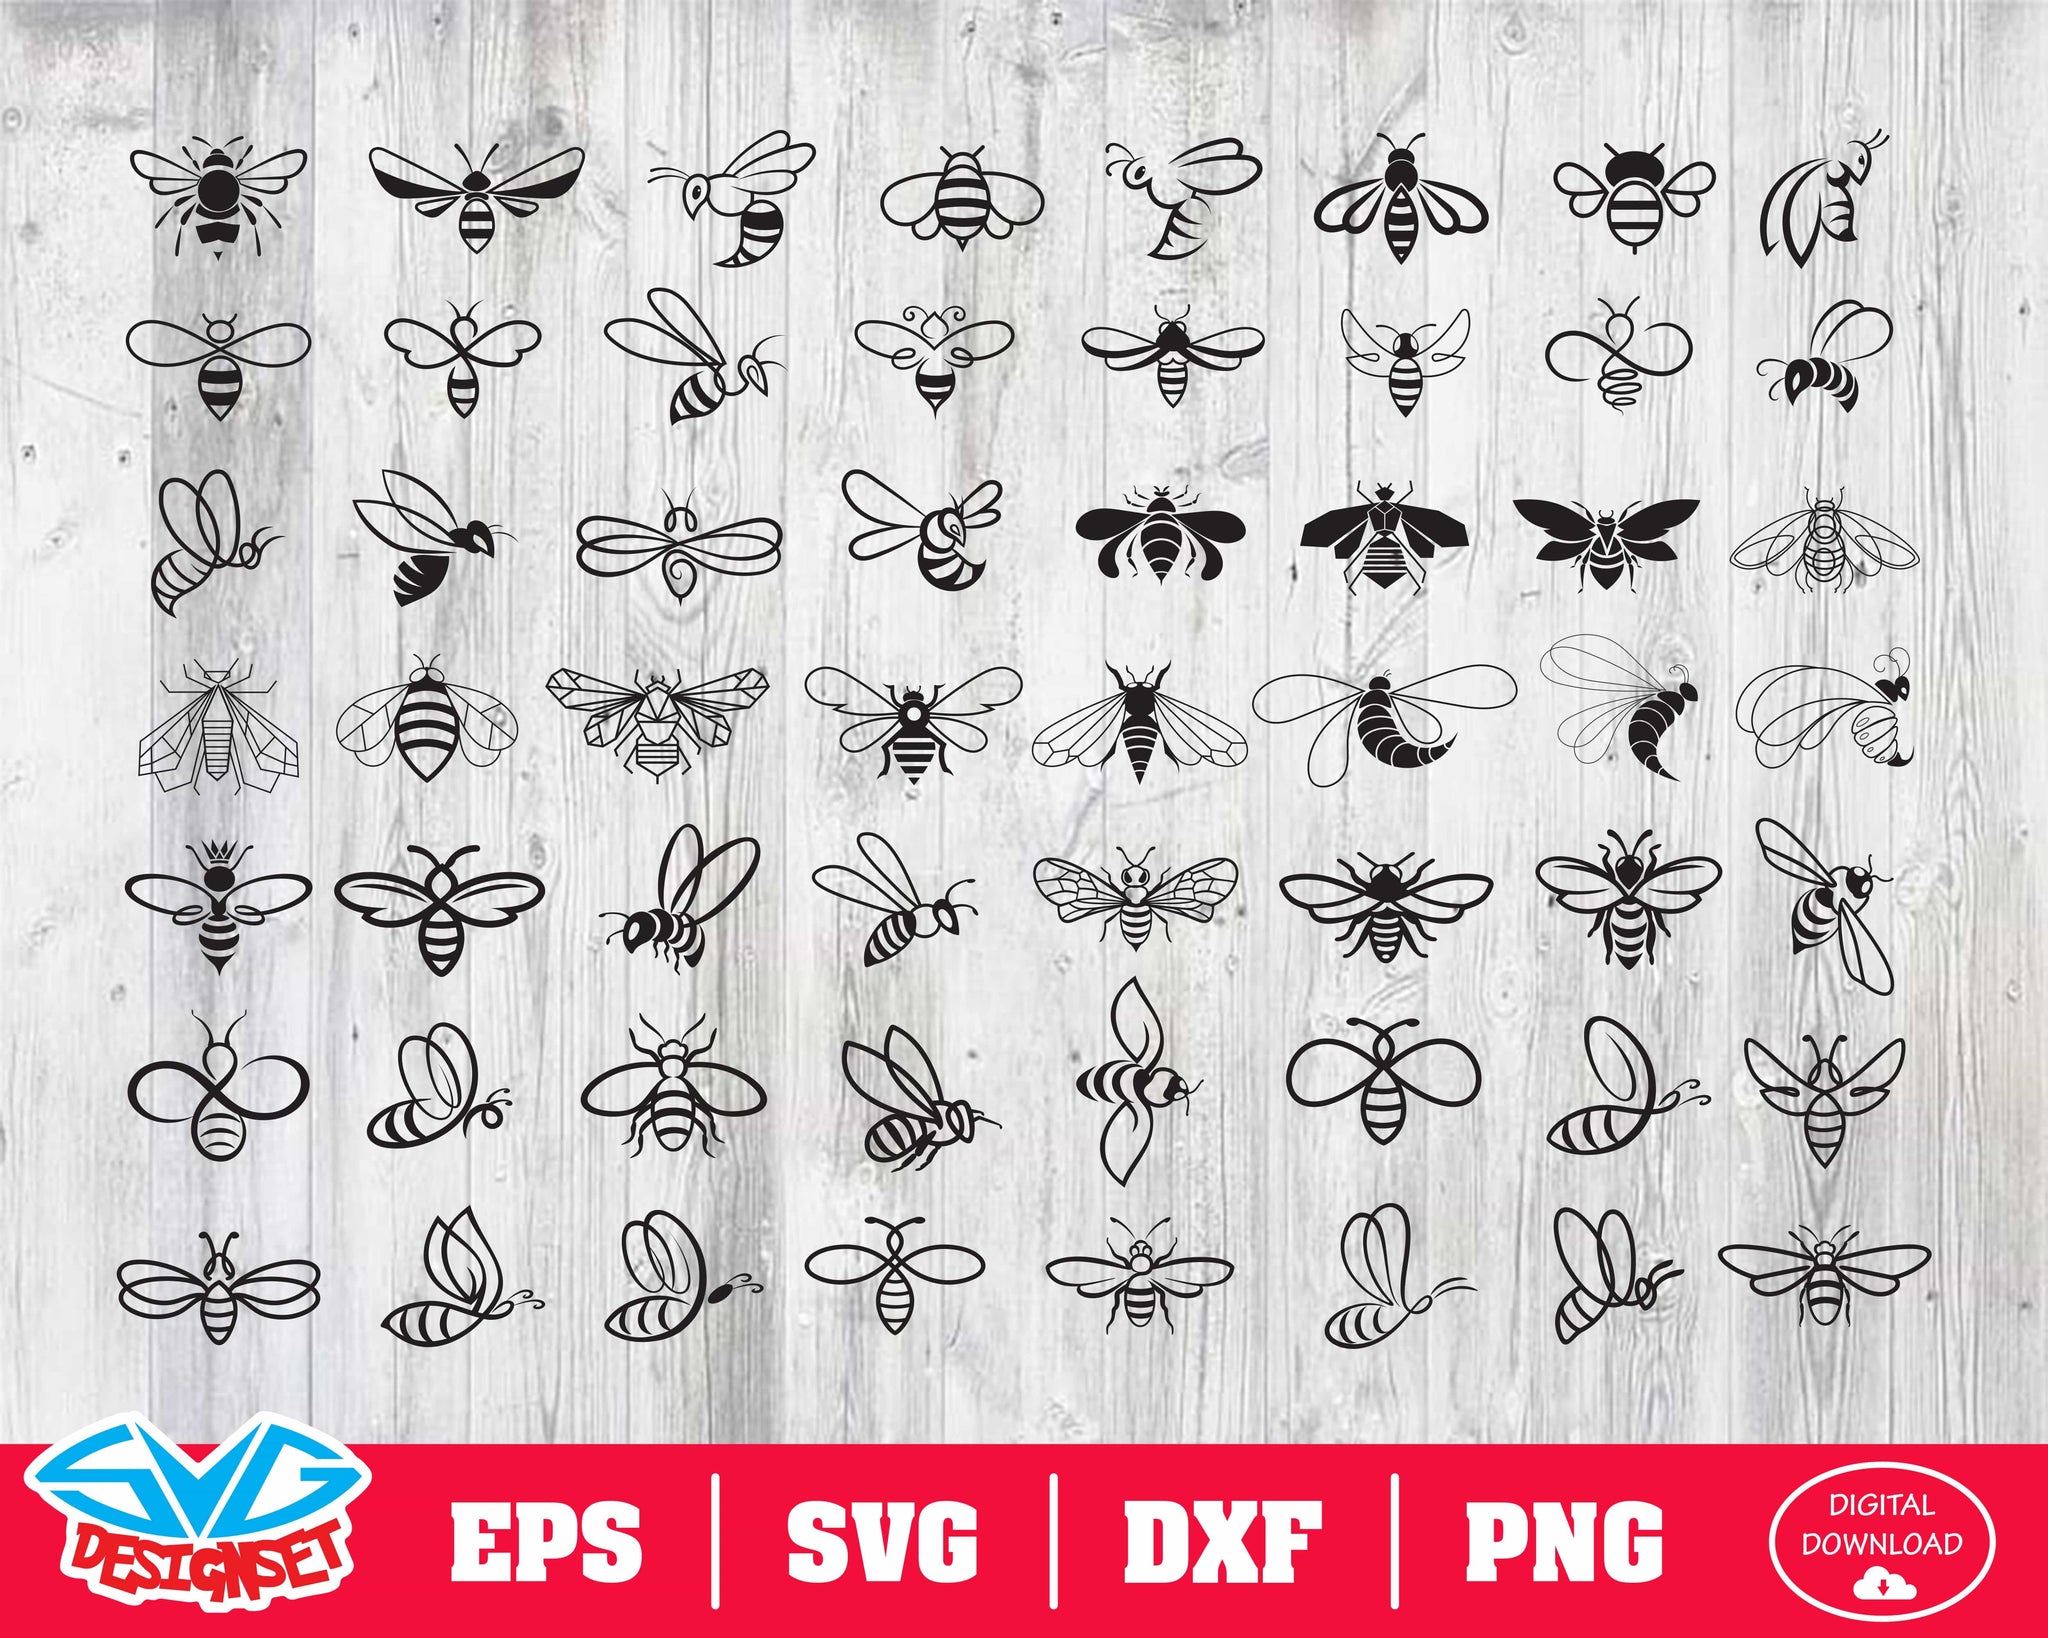 Bee Svg, Dxf, Eps, Png, Clipart, Silhouette and Cutfiles - SVGDesignSets